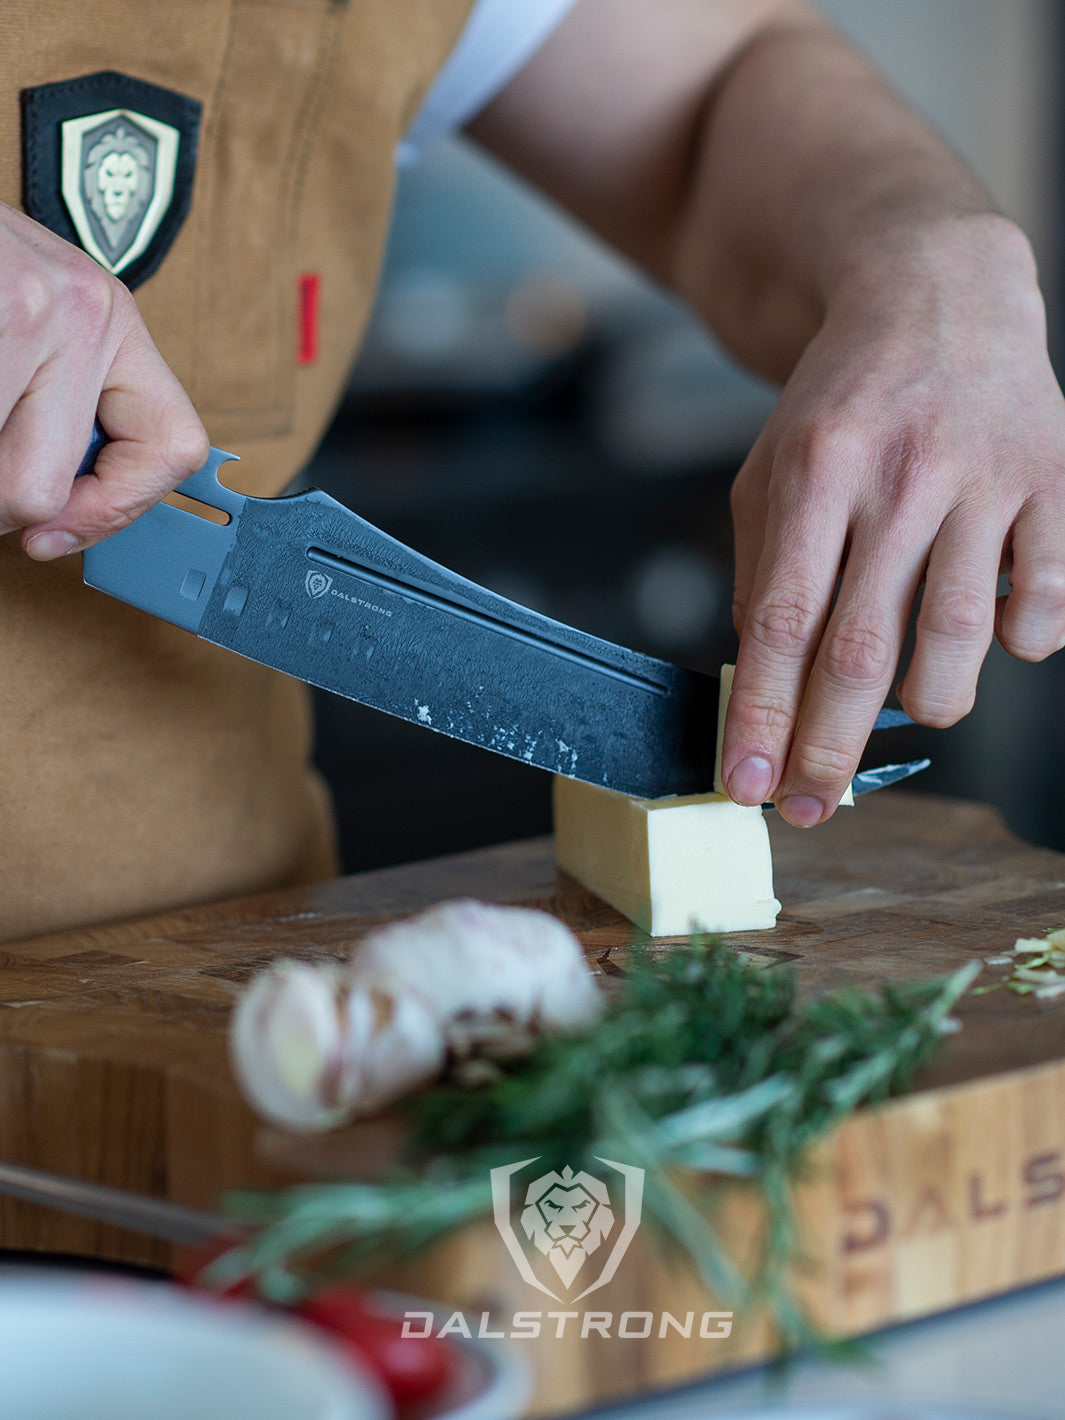 Dalstrong delta wolf series 9 inch pitmaster knife with forked tip and bottle opener with a sliced butter on a cutting board.